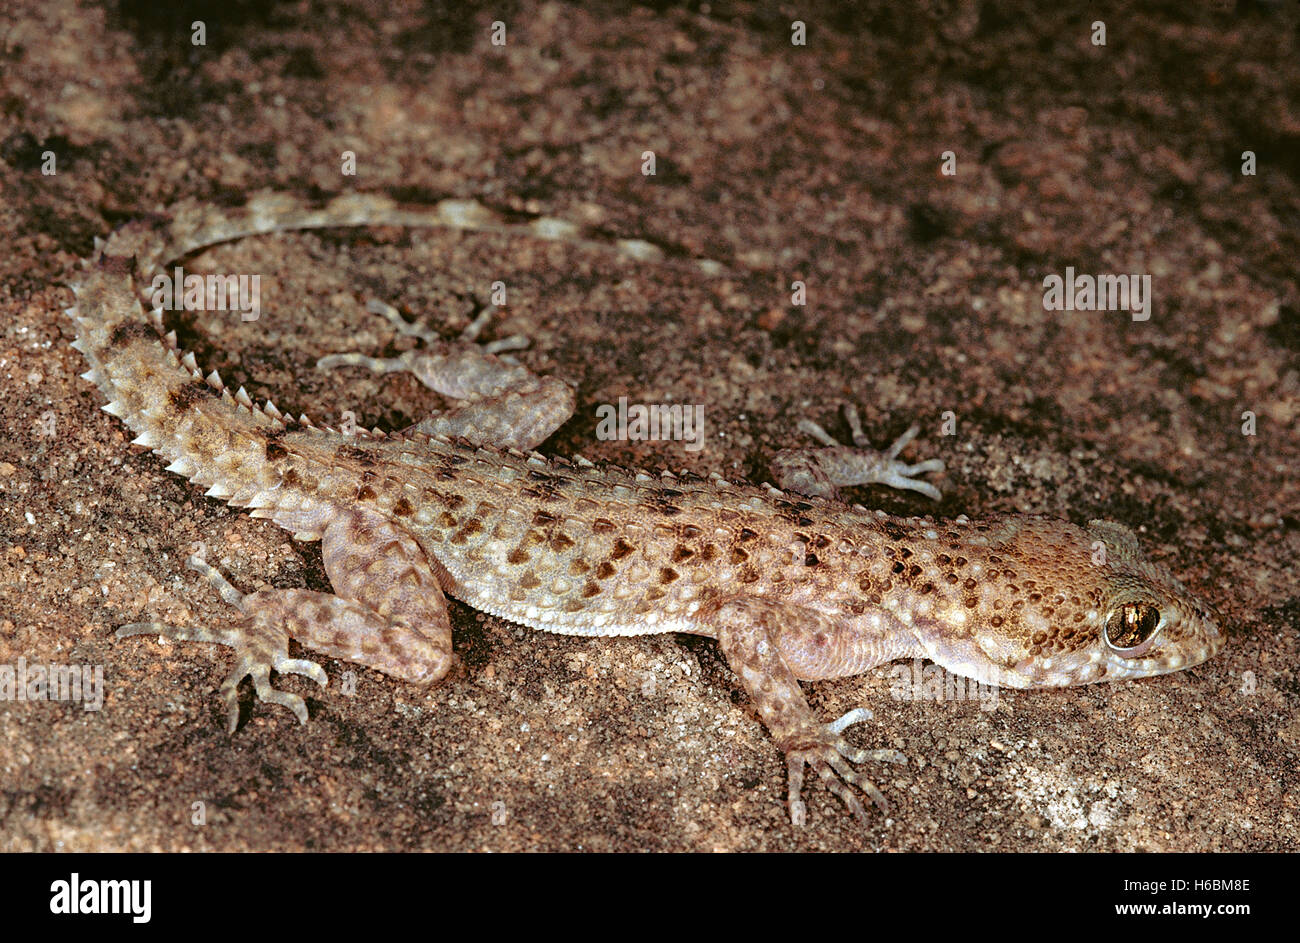 Gymnodactylus Scaber, Rough-tailed gecko. A ground dwelling gecko found in India in western Madhya Pradesh, parts of Rajasthan and Gujarat. Stock Photo